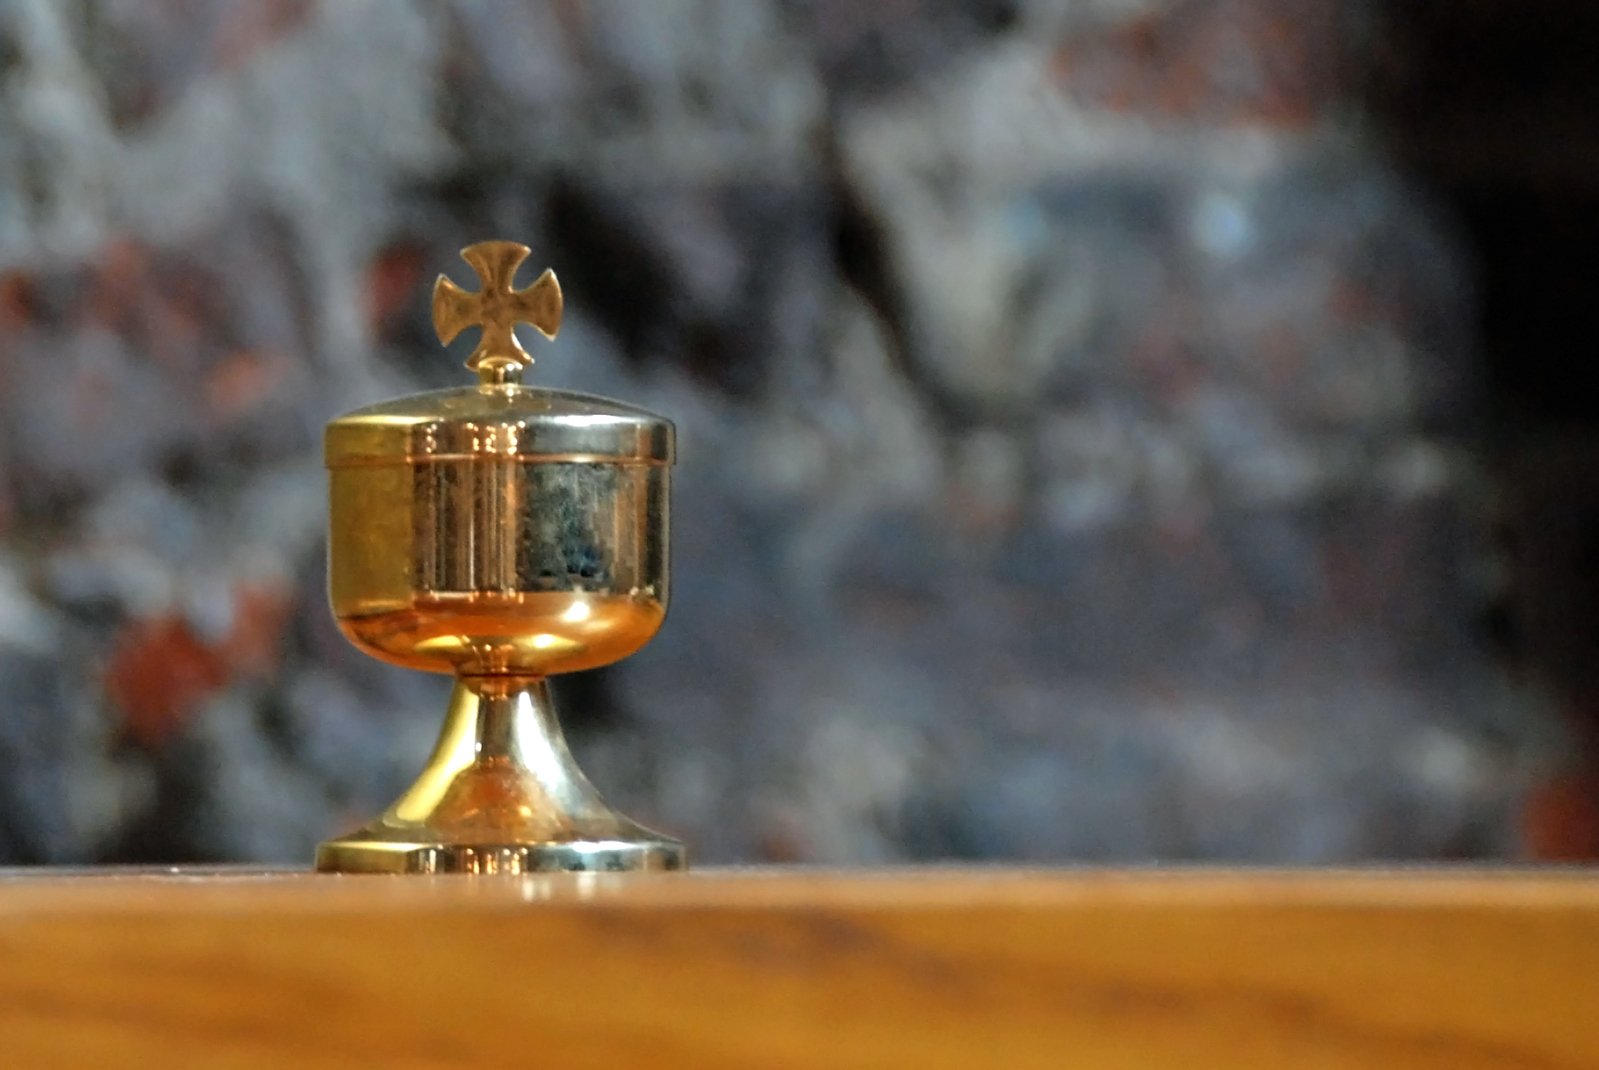 a golden cup with an ornate gold cross on it